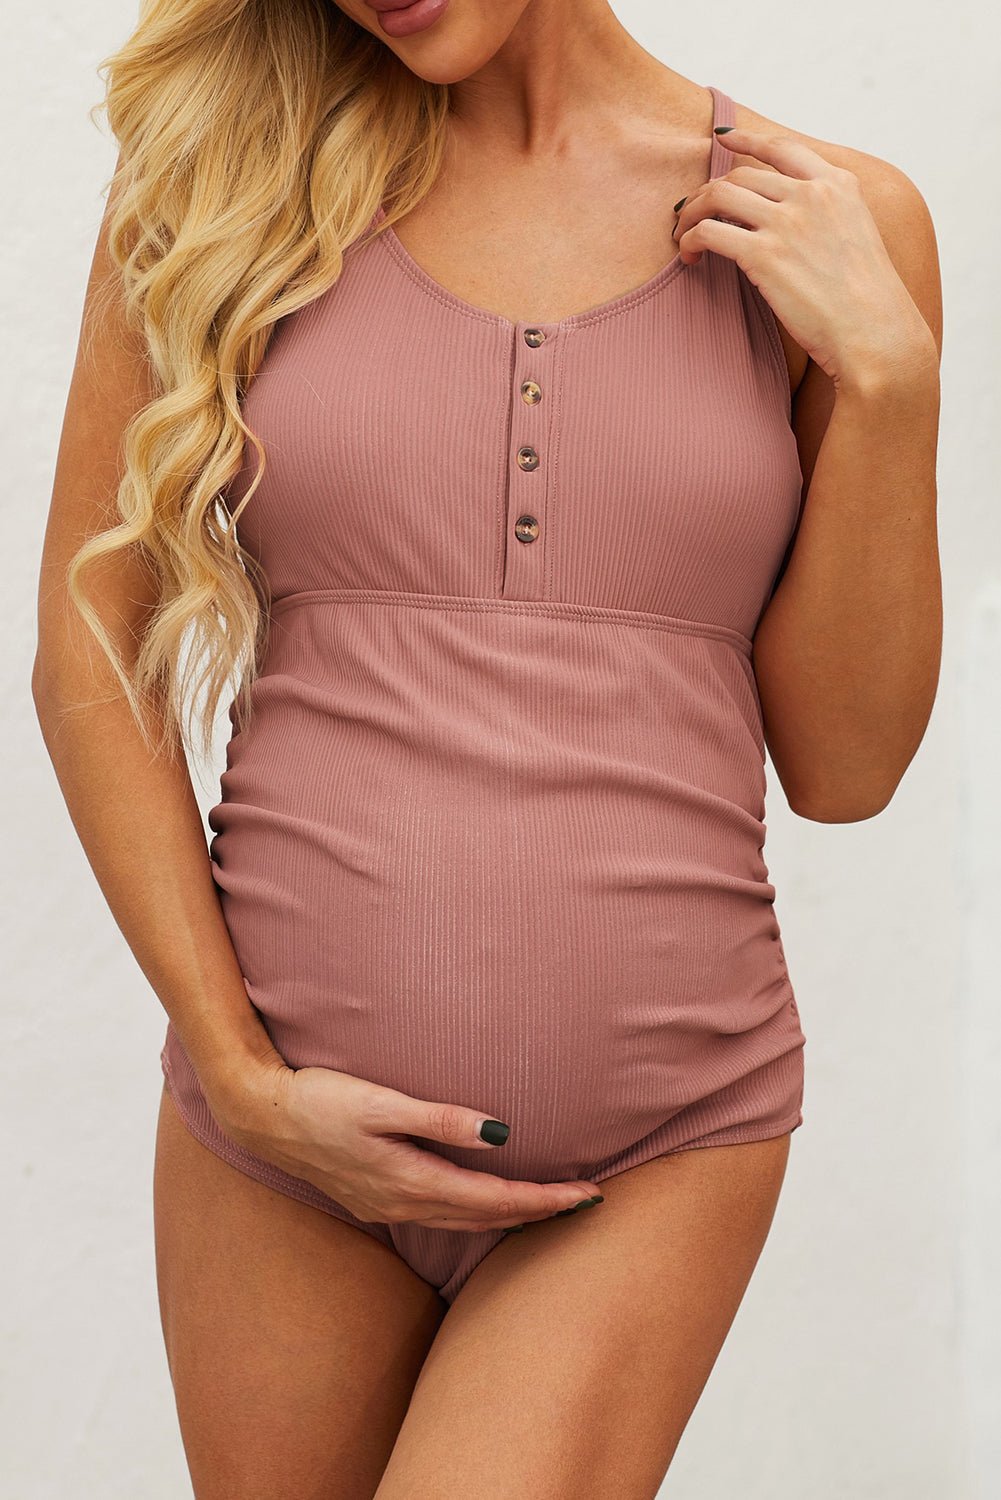 Ribbed Spaghetti Strap One-Piece Maternity Swimsuit – Sunset and Swim